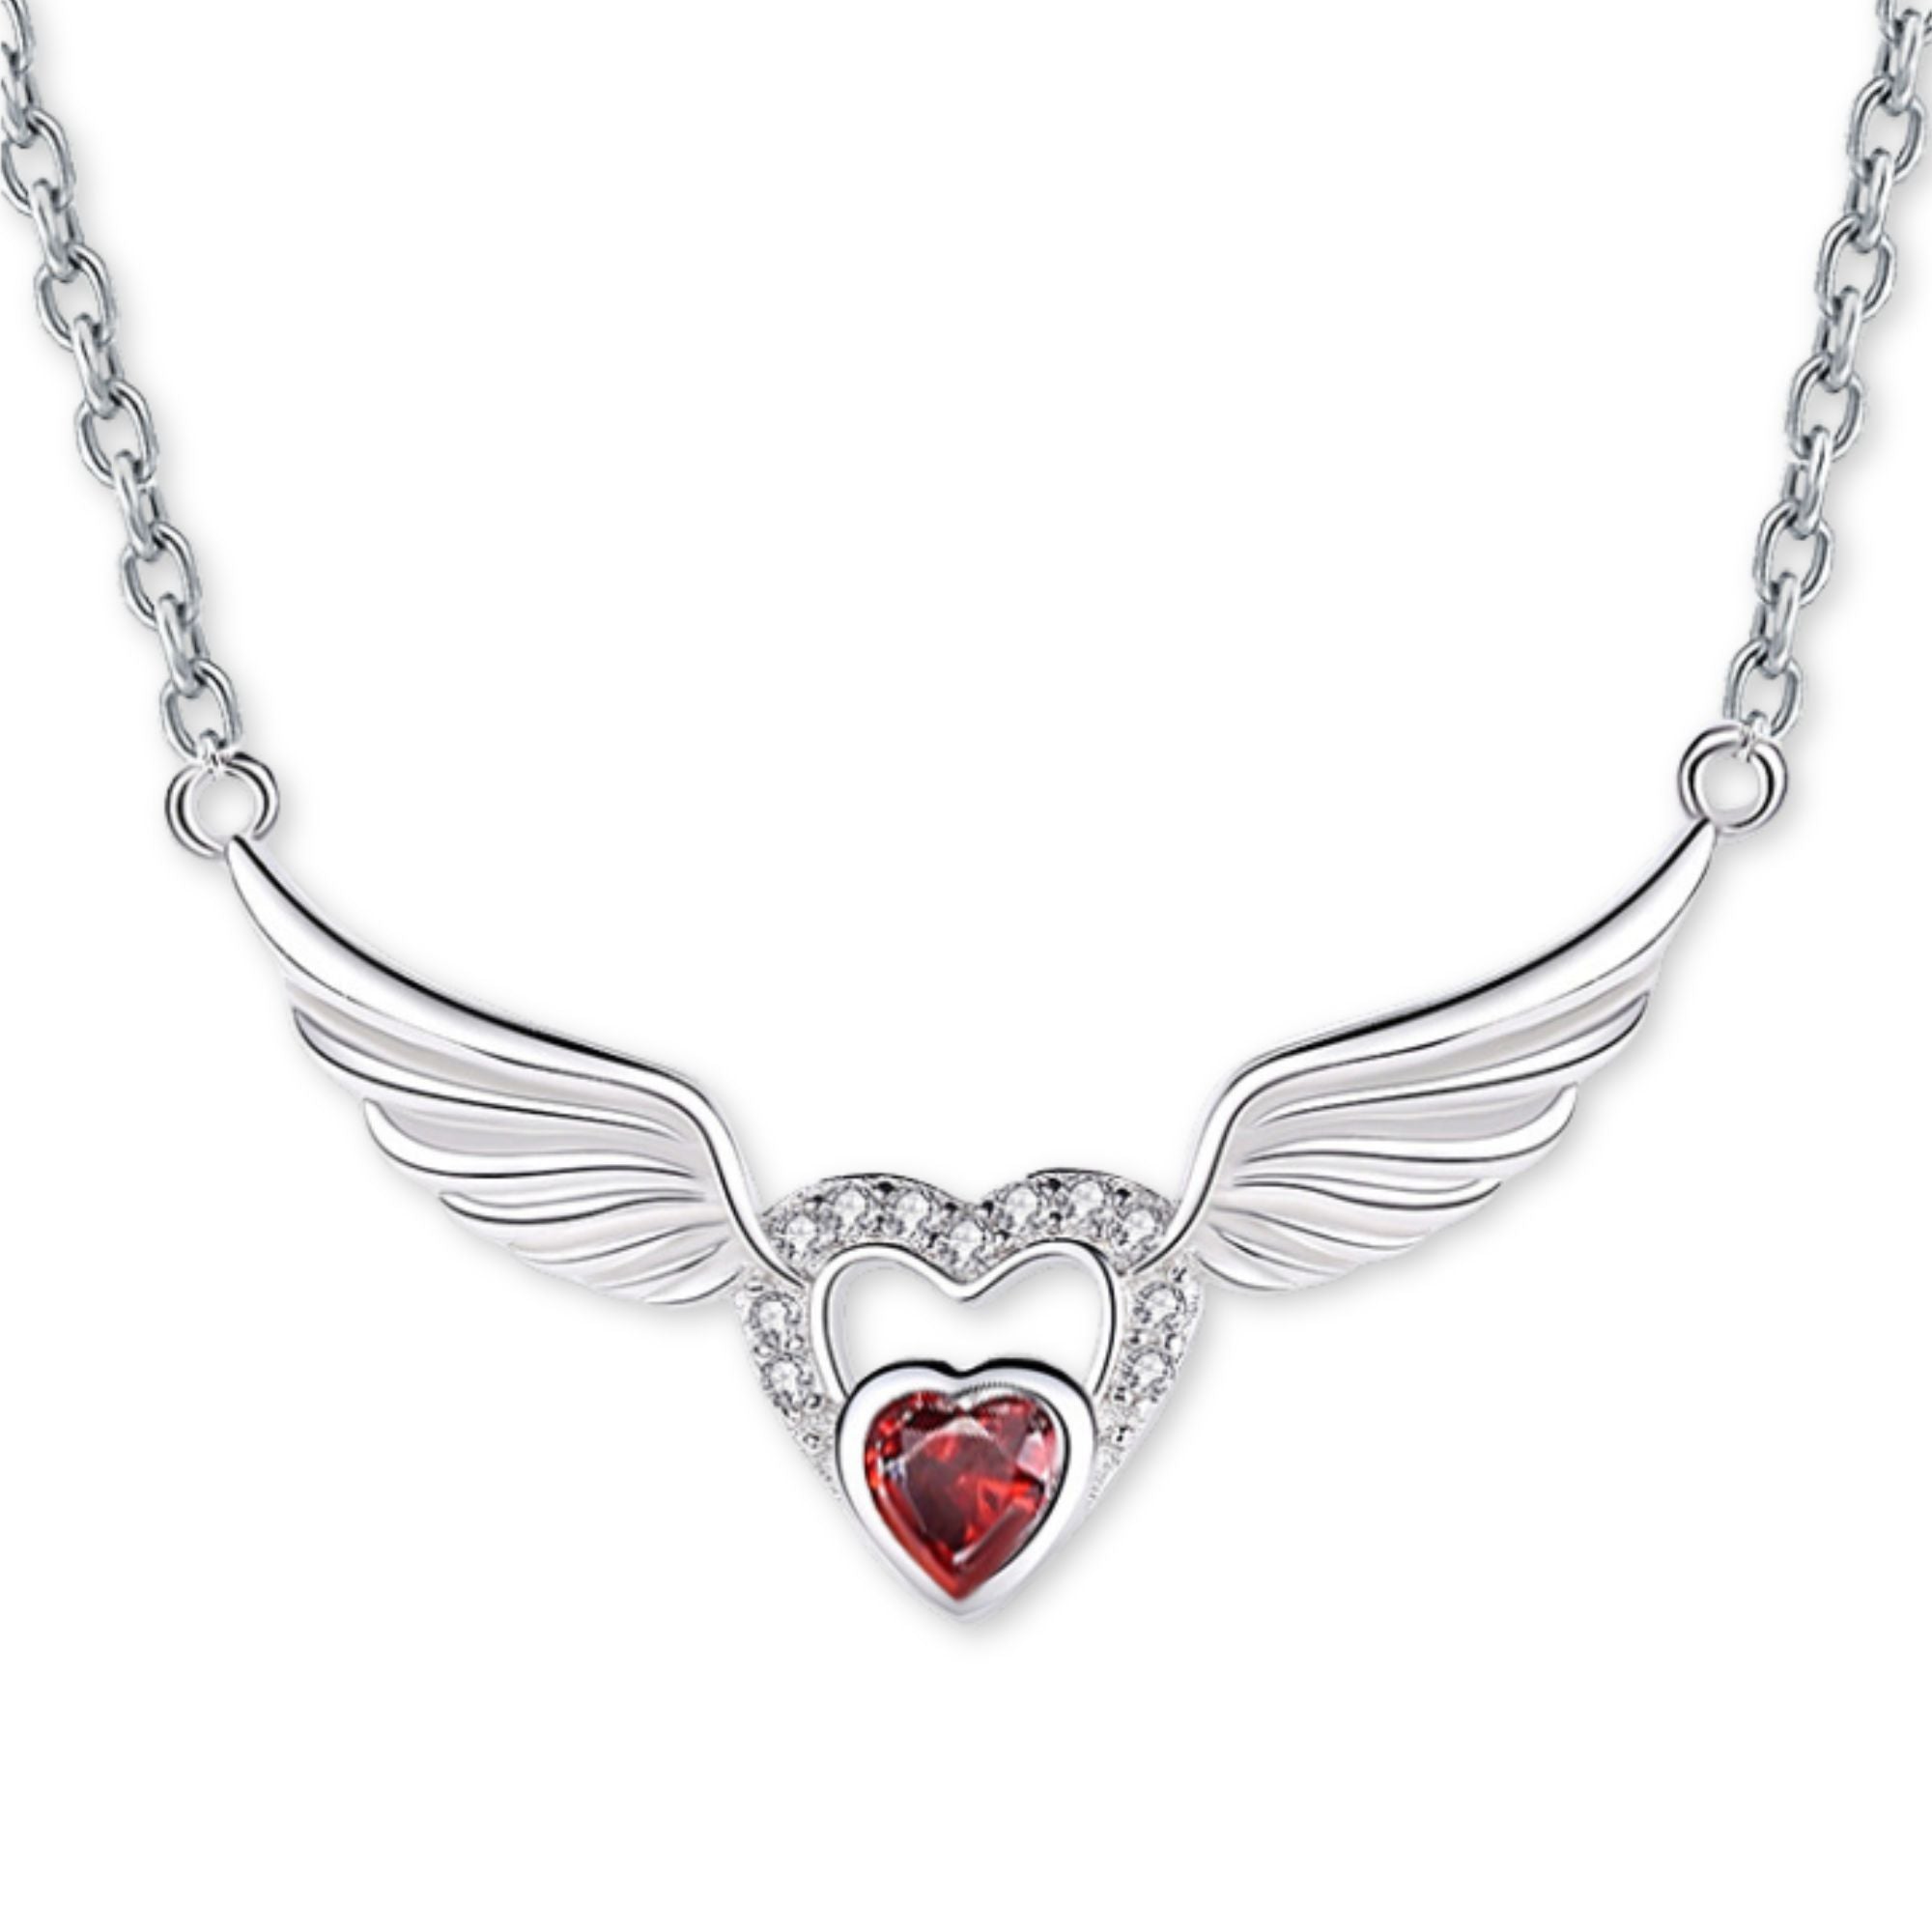 Angel Wings and Heart Sterling Silver Pendant - Clear, Blue or Red Color: Red Jesus Passion Apparel